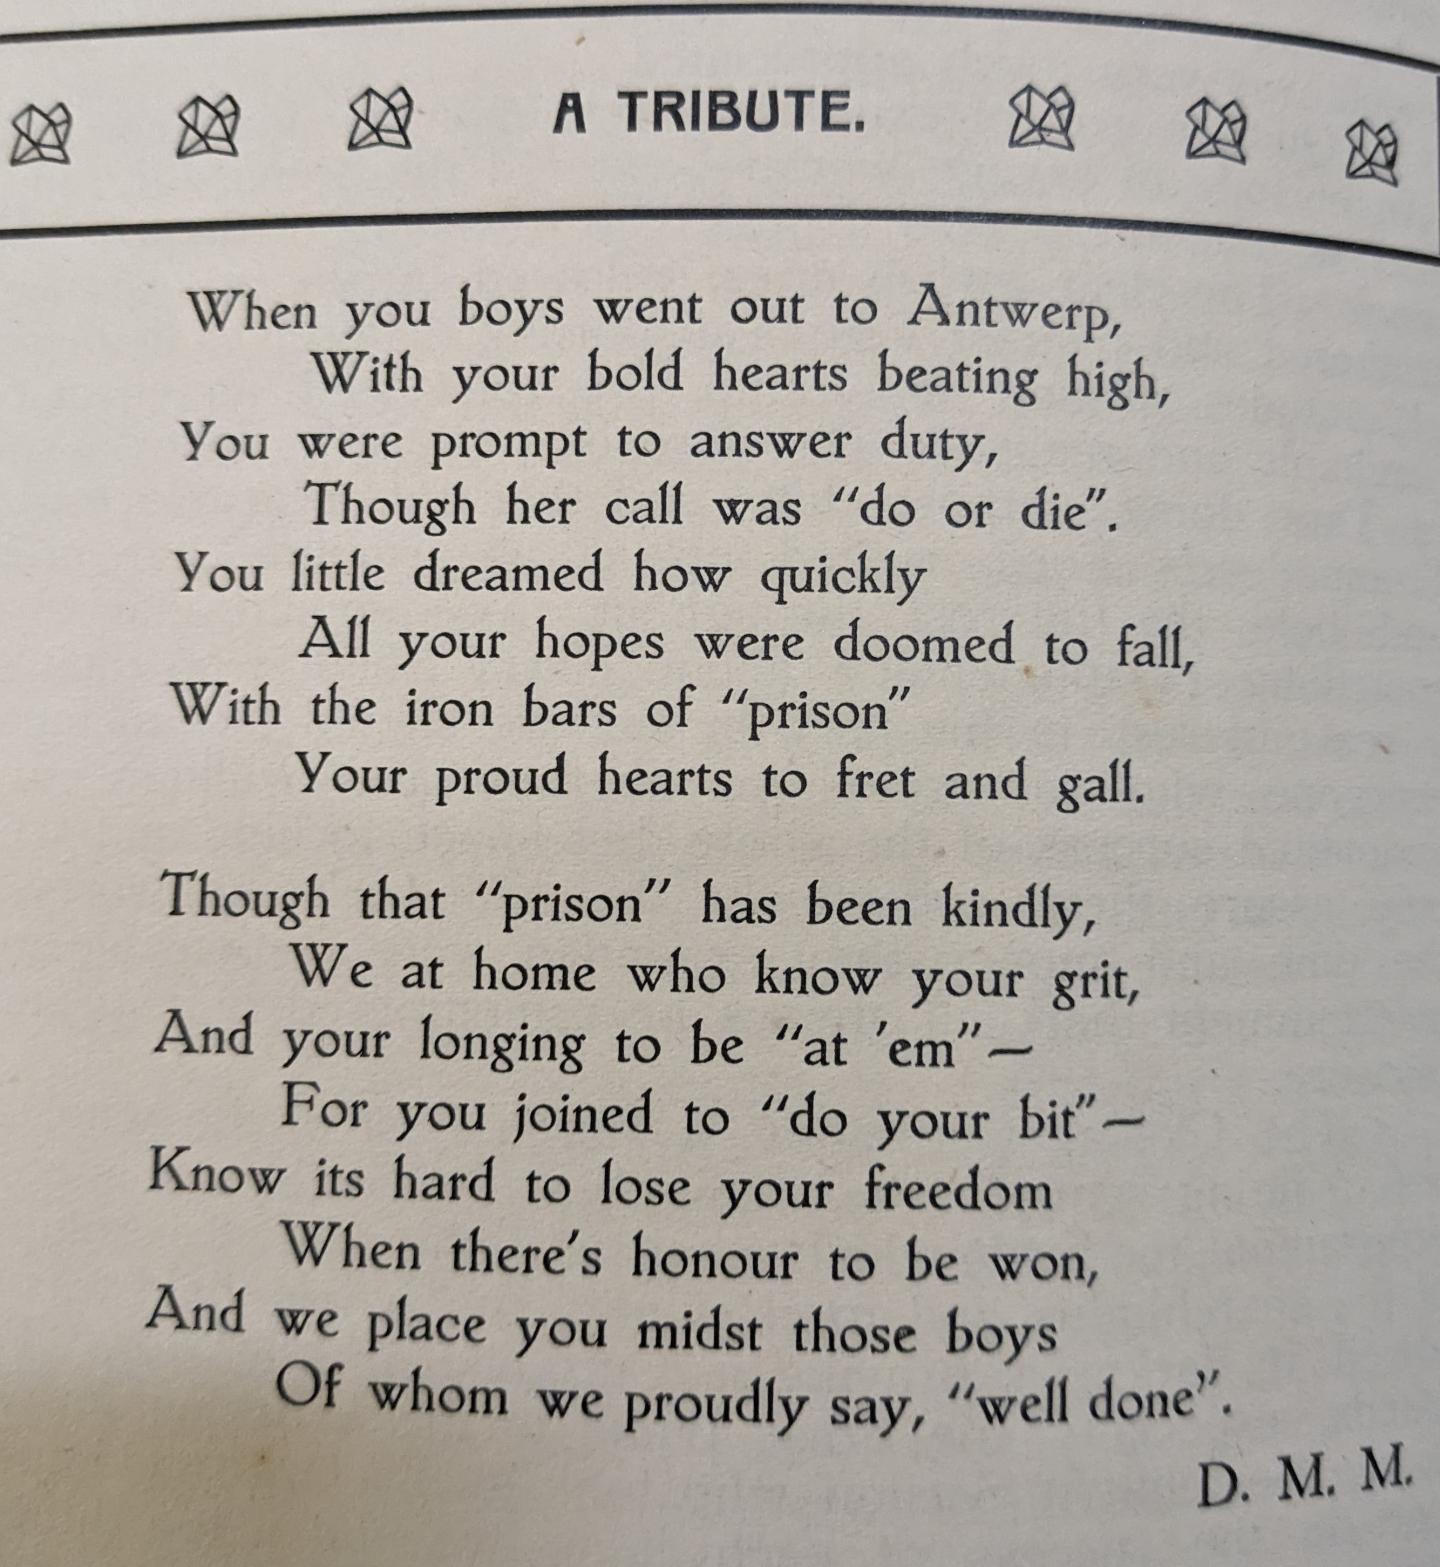 A poem entitled 'A Tribute' by D.M.M., which appeared in the April 1916 edition of The Camp Magazine